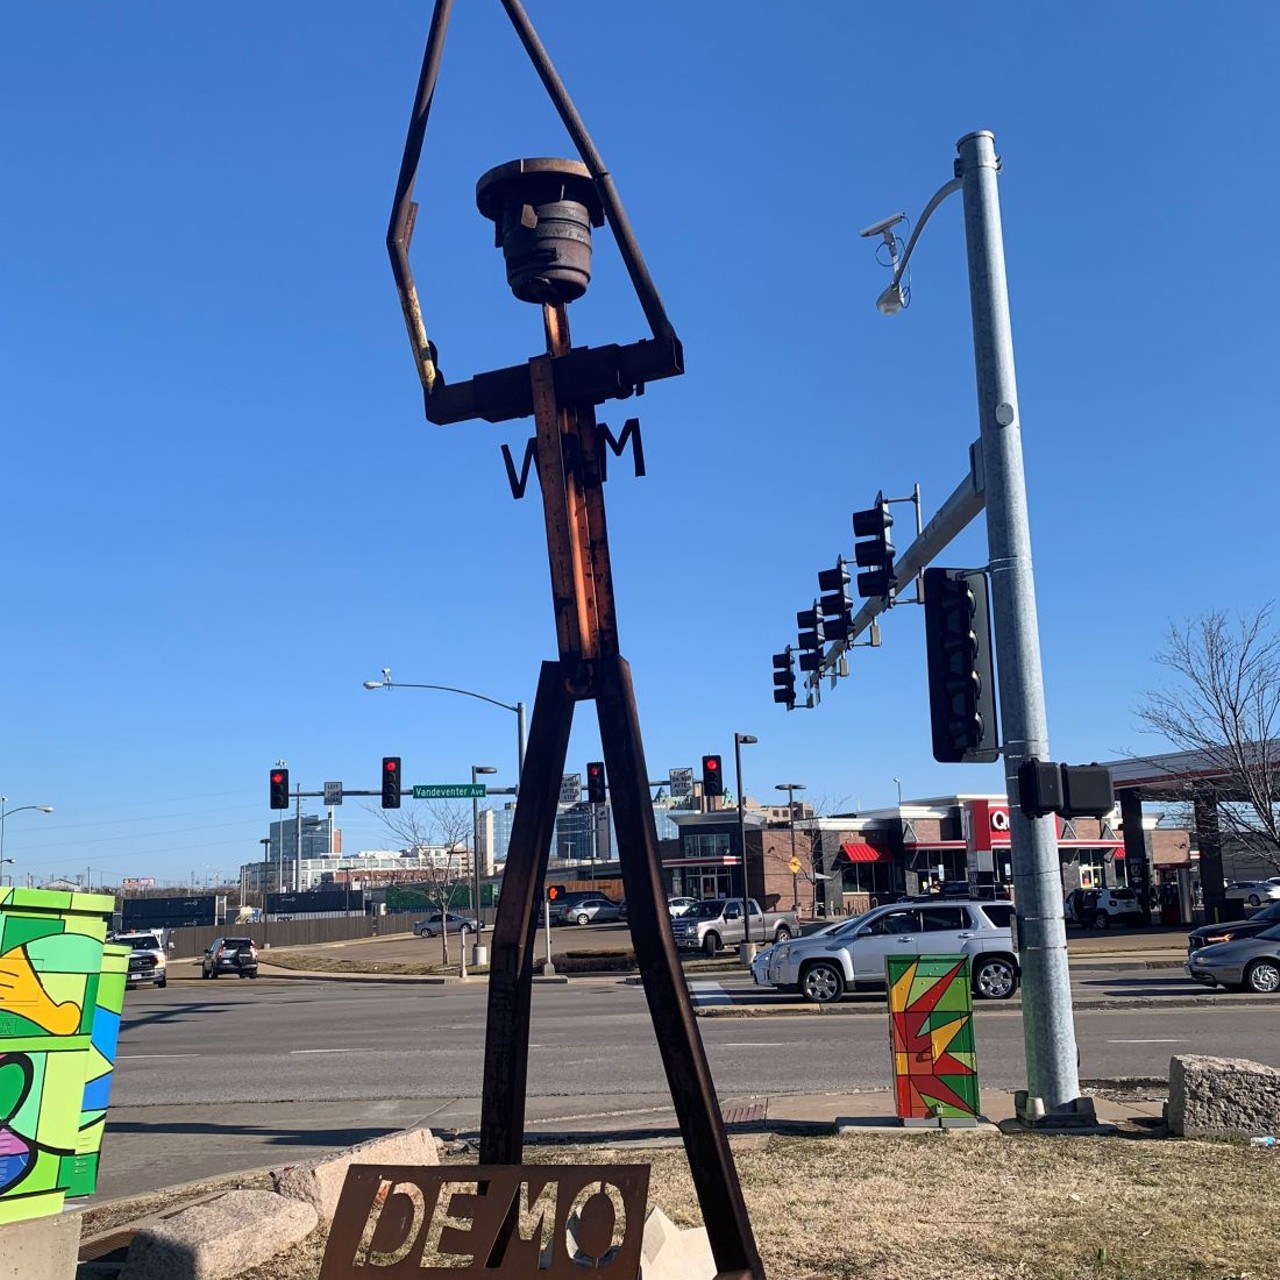 "Demo Man&#148;
Intersection of the exit of I-64 and Vandeventer across from Quick Trip (Vandeventer Avenue, 63110)
Made of scrap metal. The sculpture was created by Bud Knobeloch.
Photo credit: Riverfront Times / @riverfronttimes on Instagram